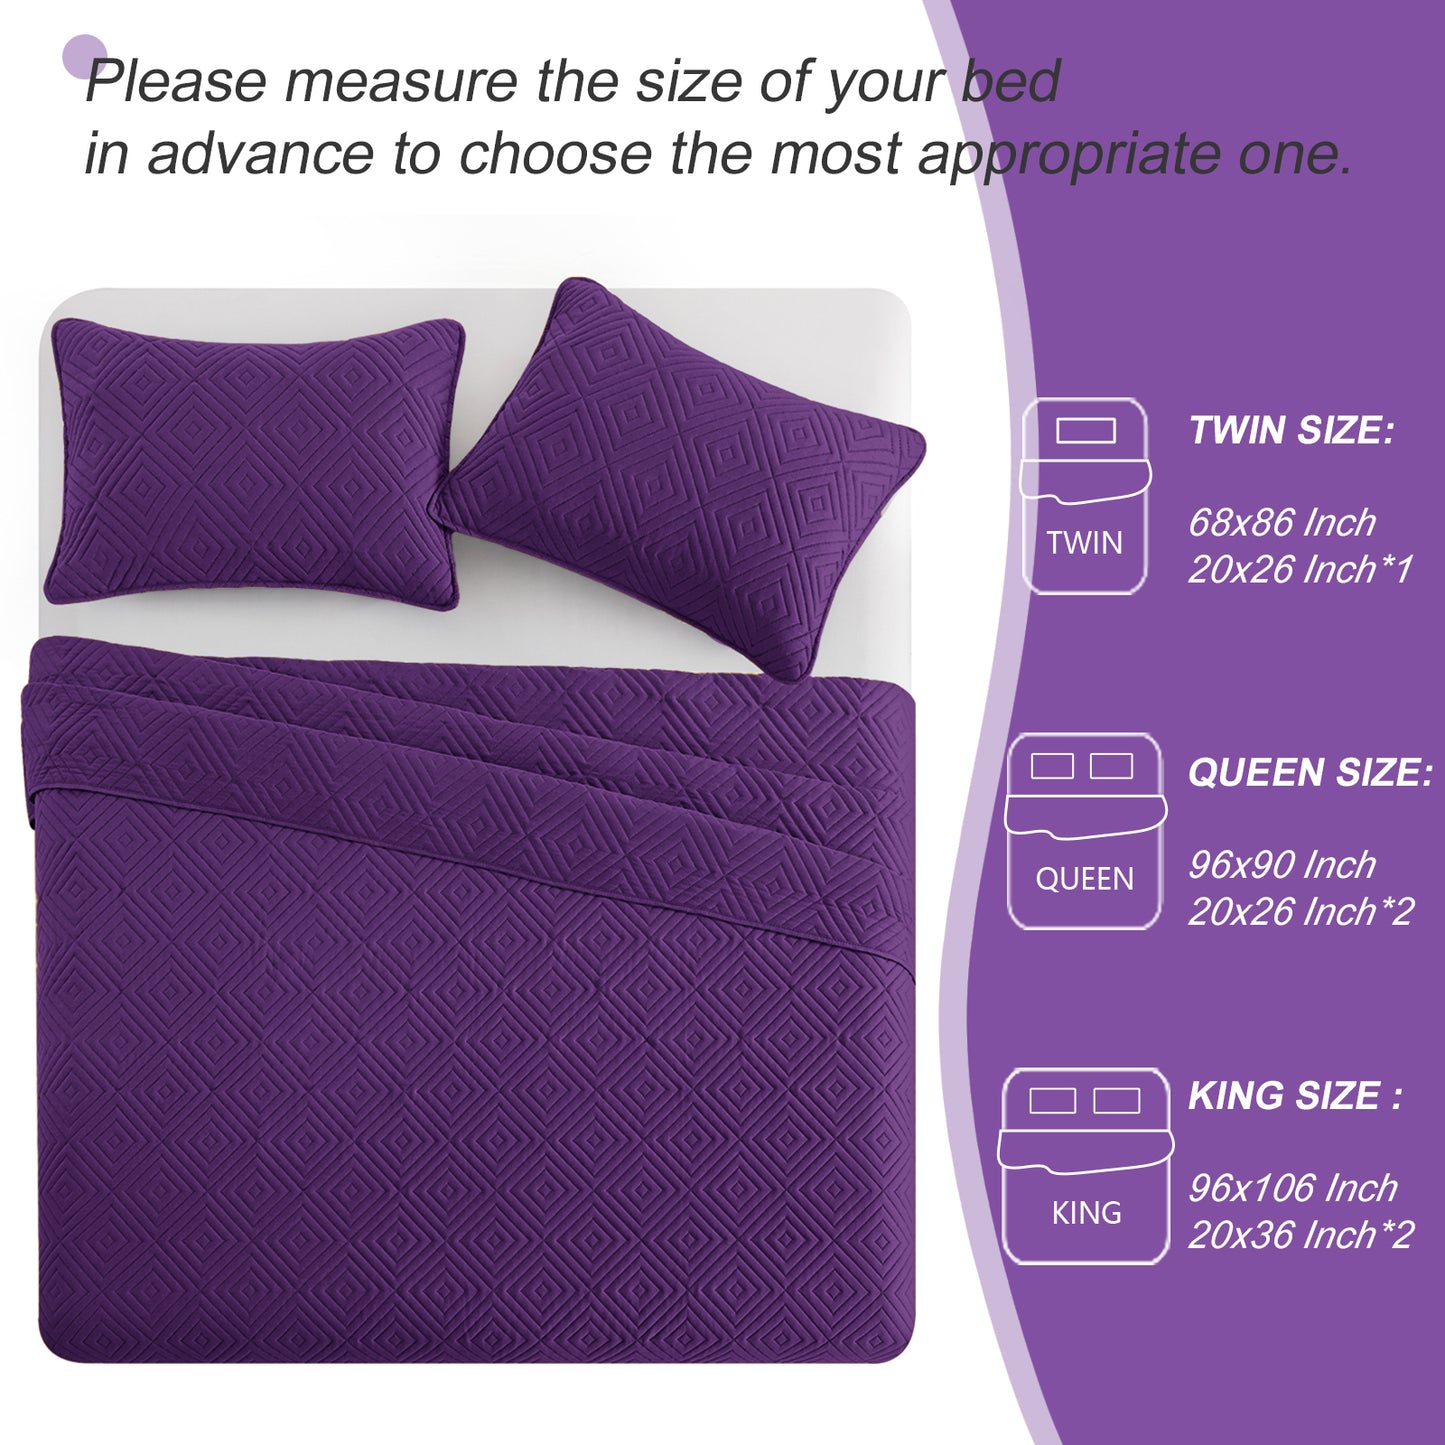 Exclusivo Mezcla 2-Piece Deep Purple Twin Size Quilt Set, Square Pattern Ultrasonic Lightweight and Soft Quilts/Bedspreads/Coverlets/Bedding Set (1 Quilt, 1 Pillow Sham) for All Seasons